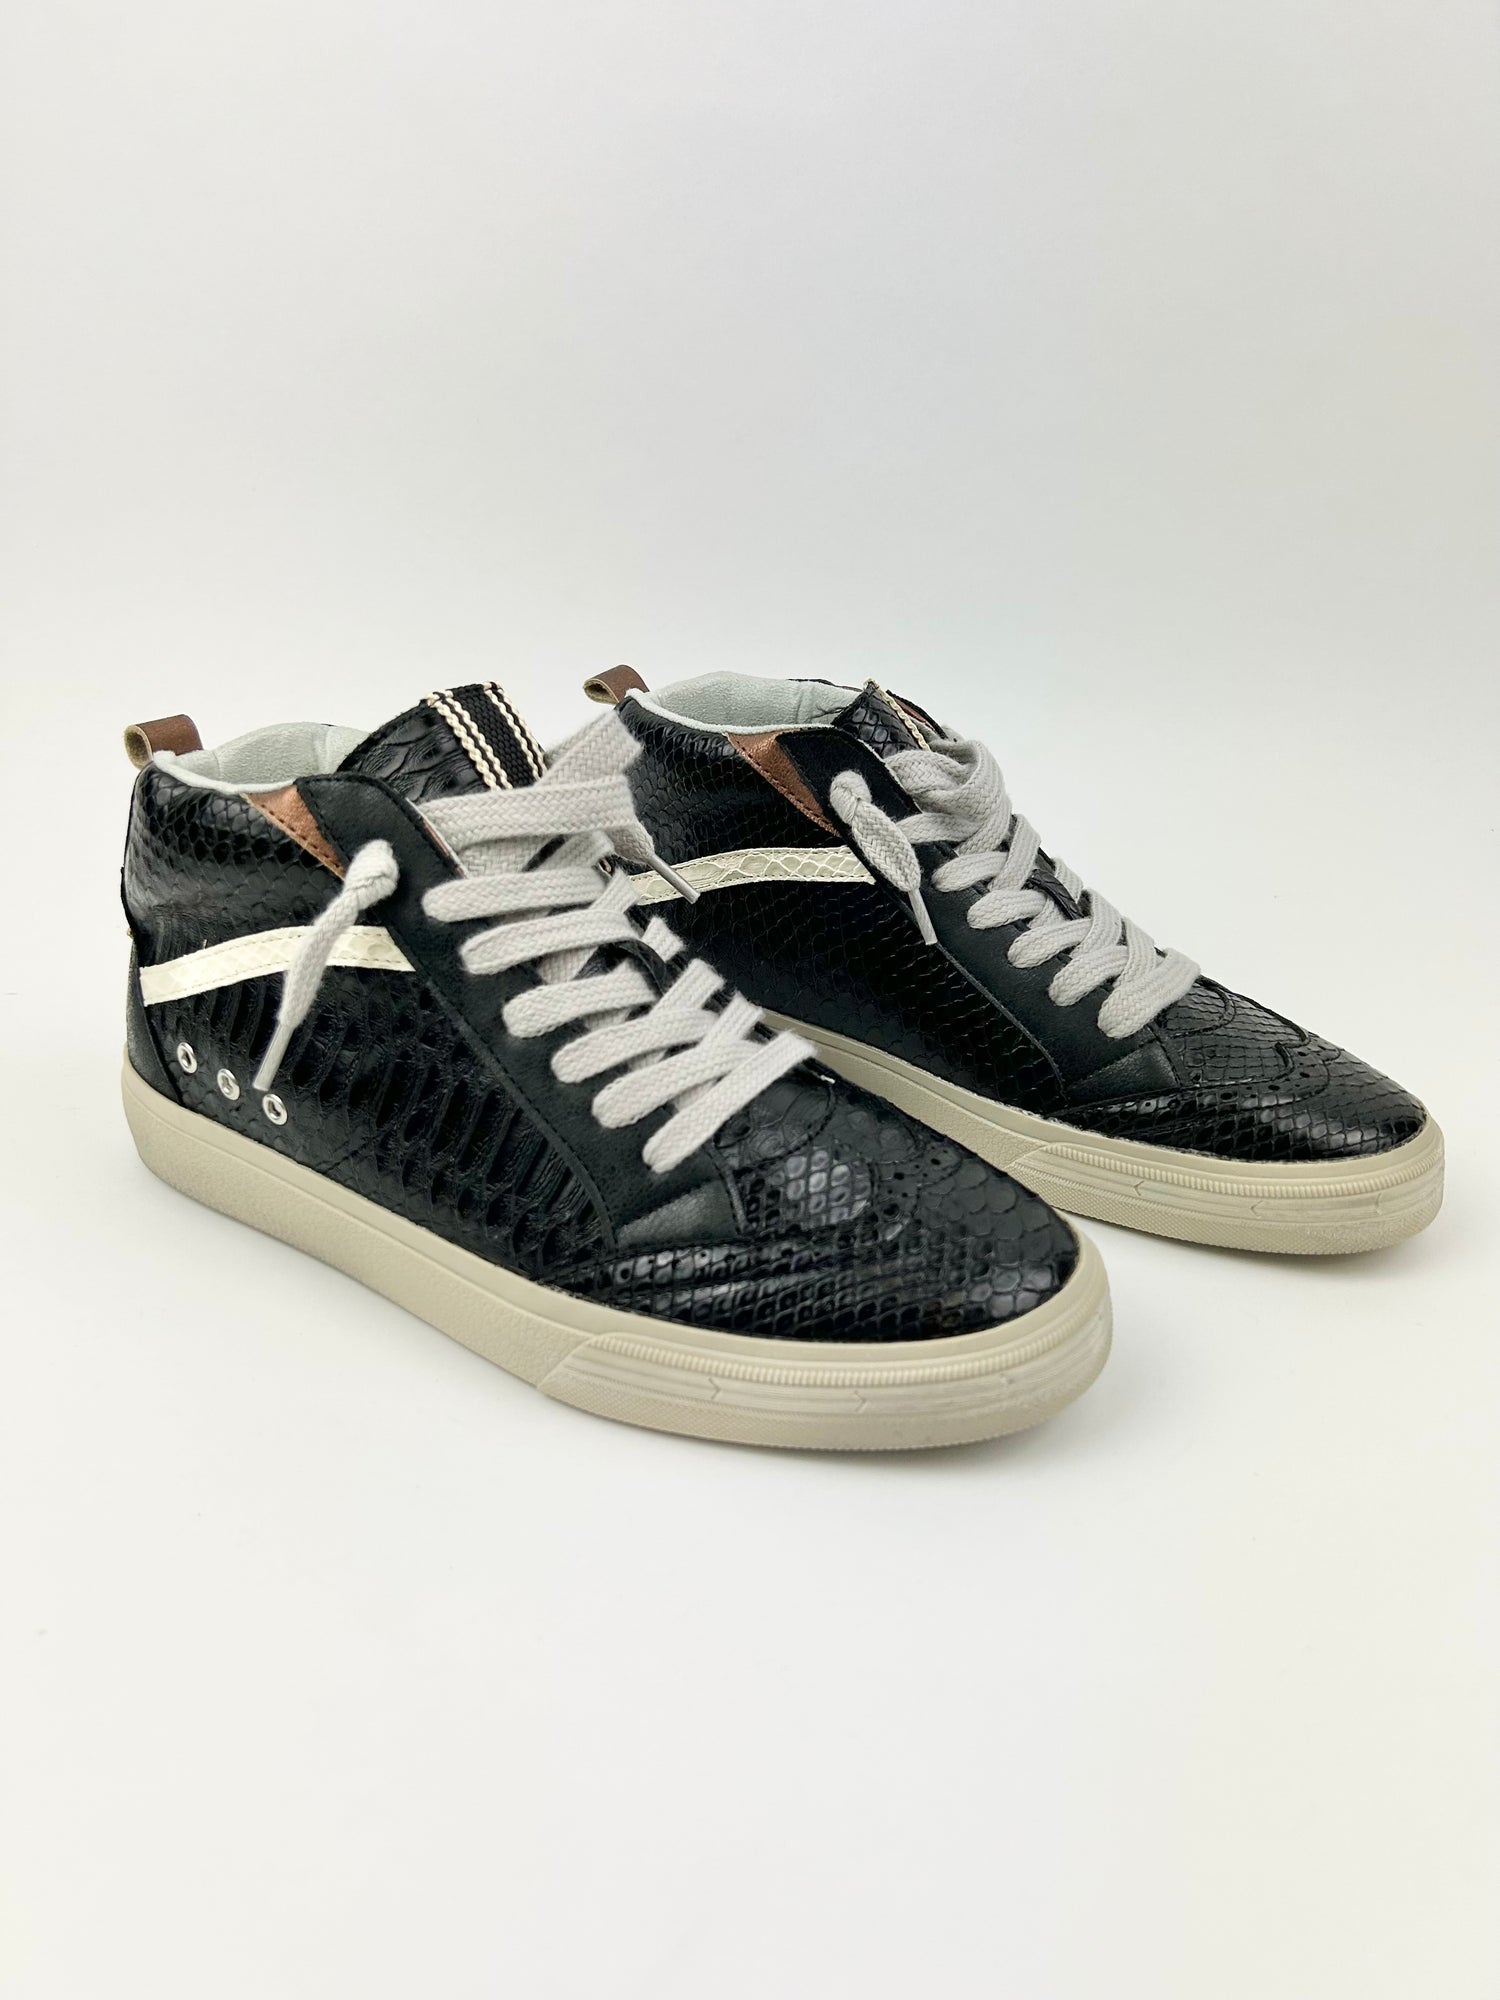 Riley Black Snake Sneaker Shoes in 6 at Wrapsody